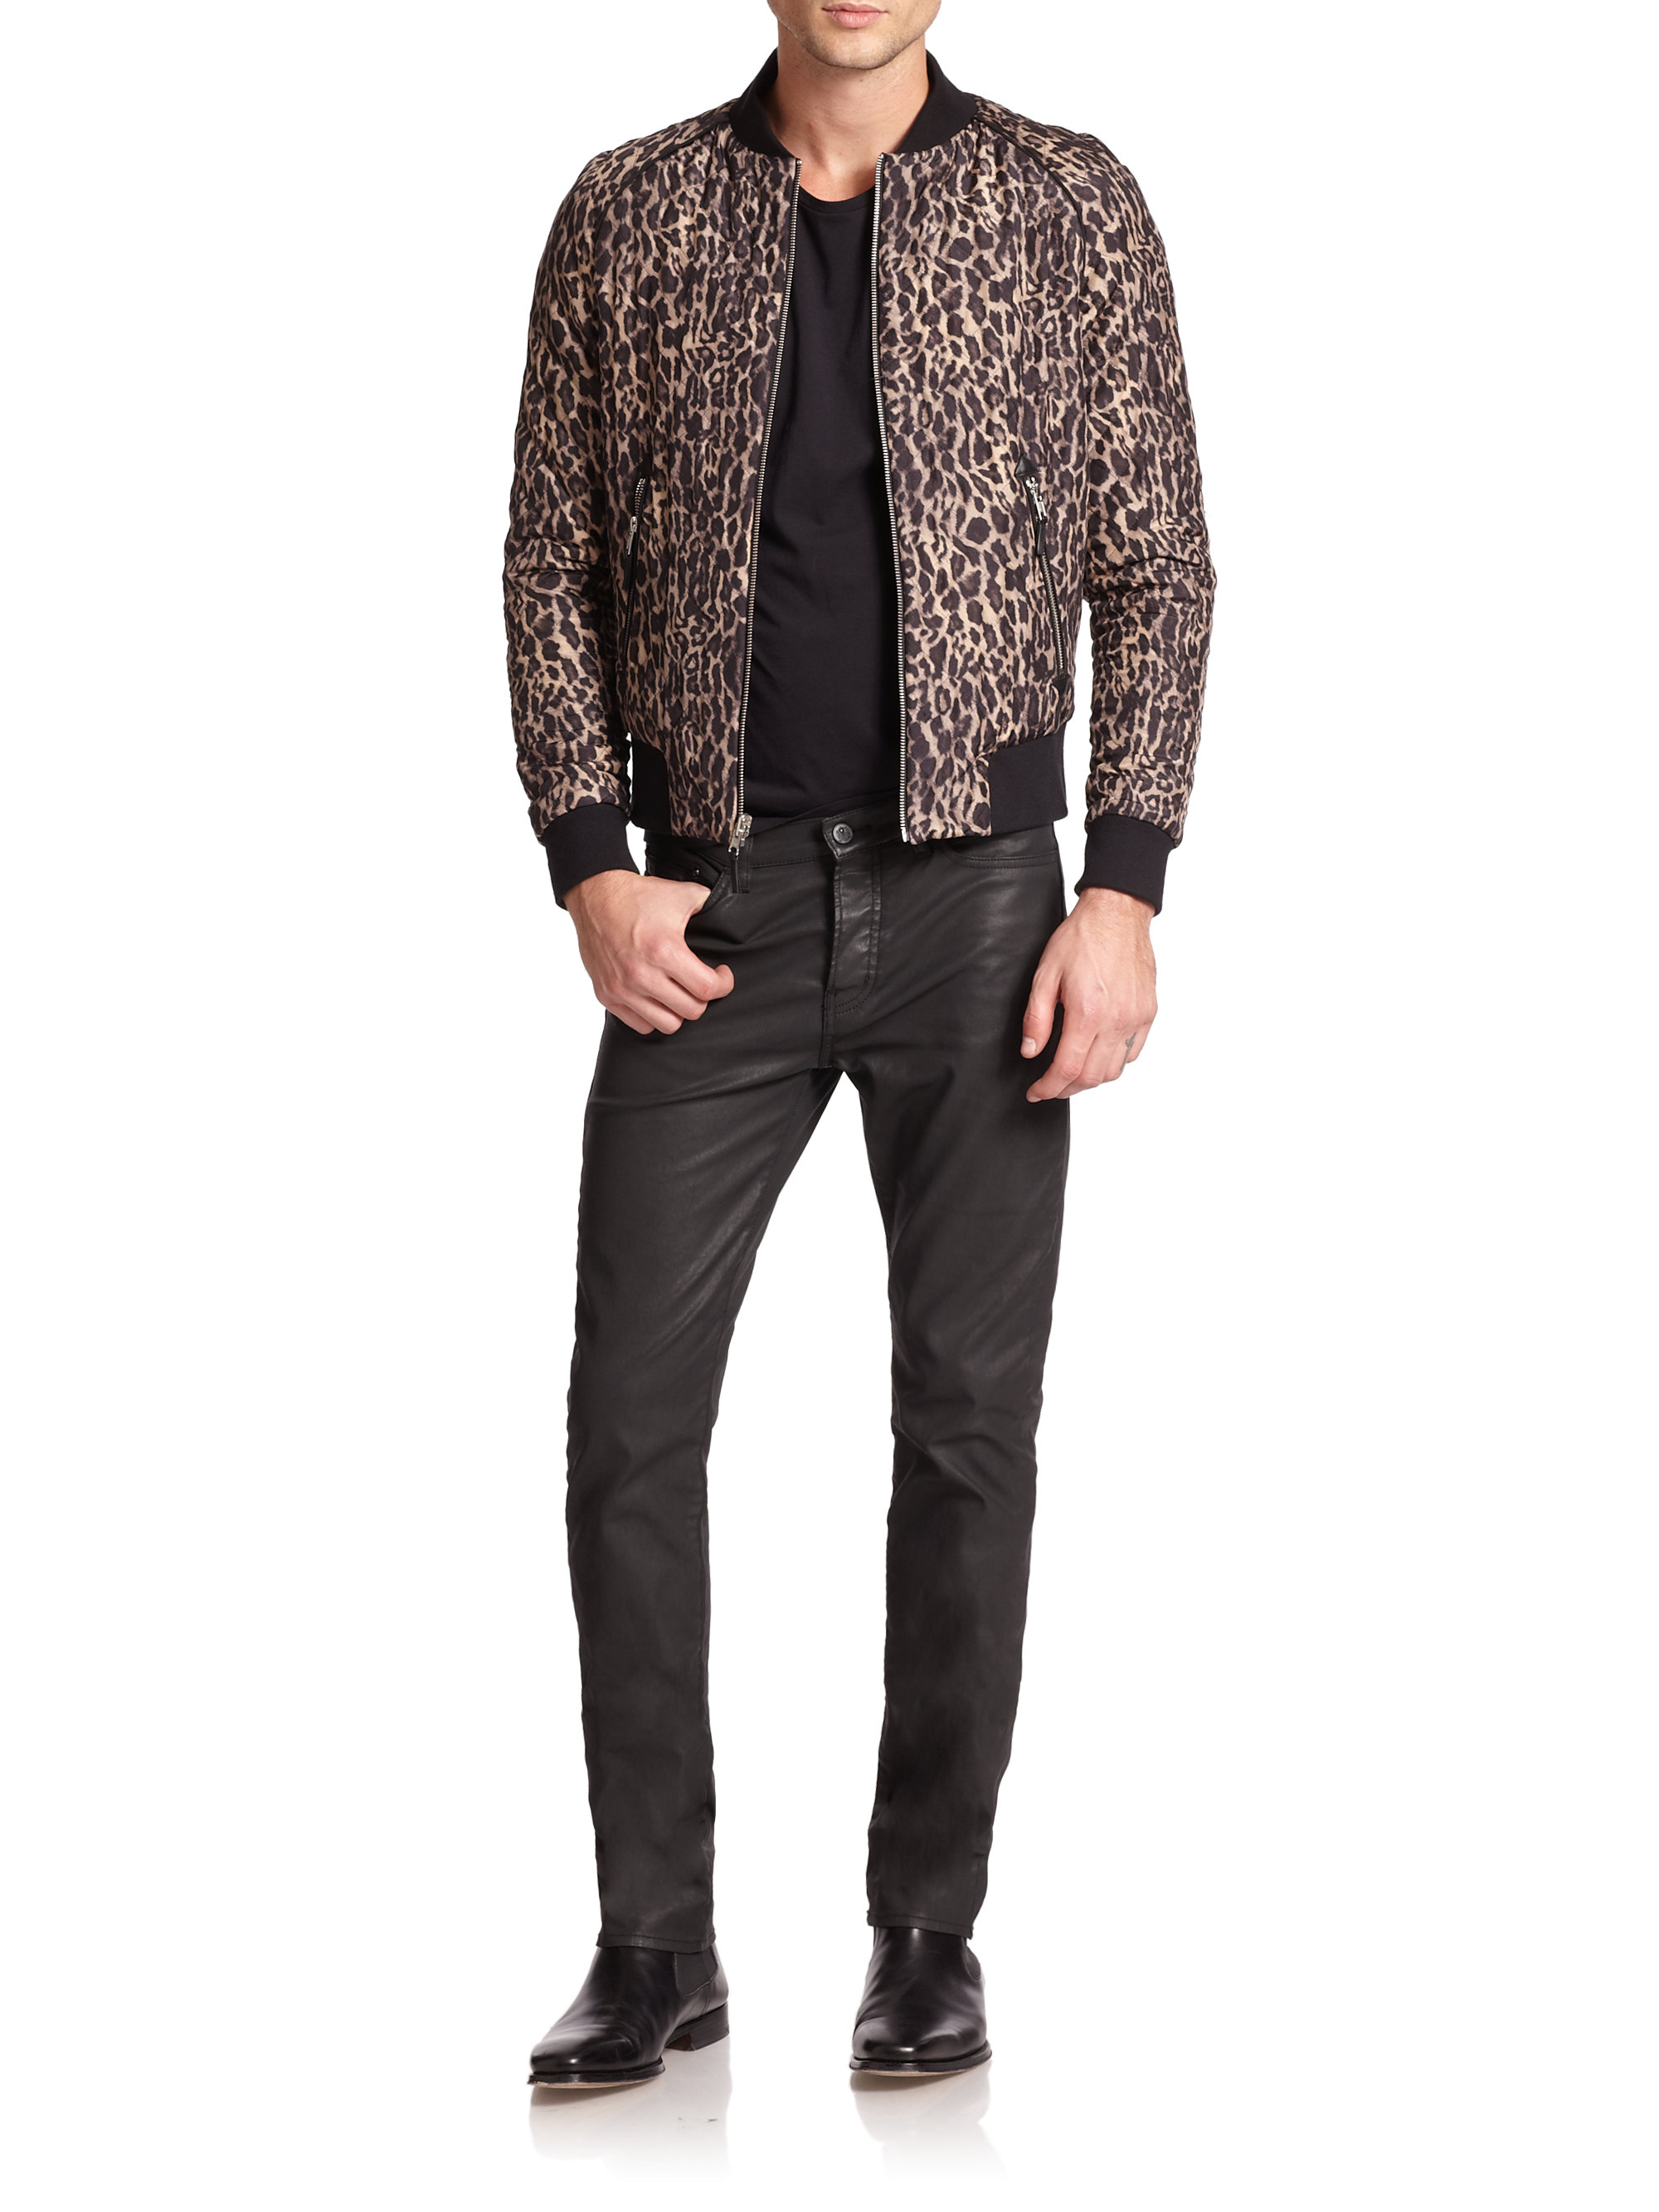 Lyst - The Kooples Quilted Leopard-Print Silk Bomber Jacket in Brown ...